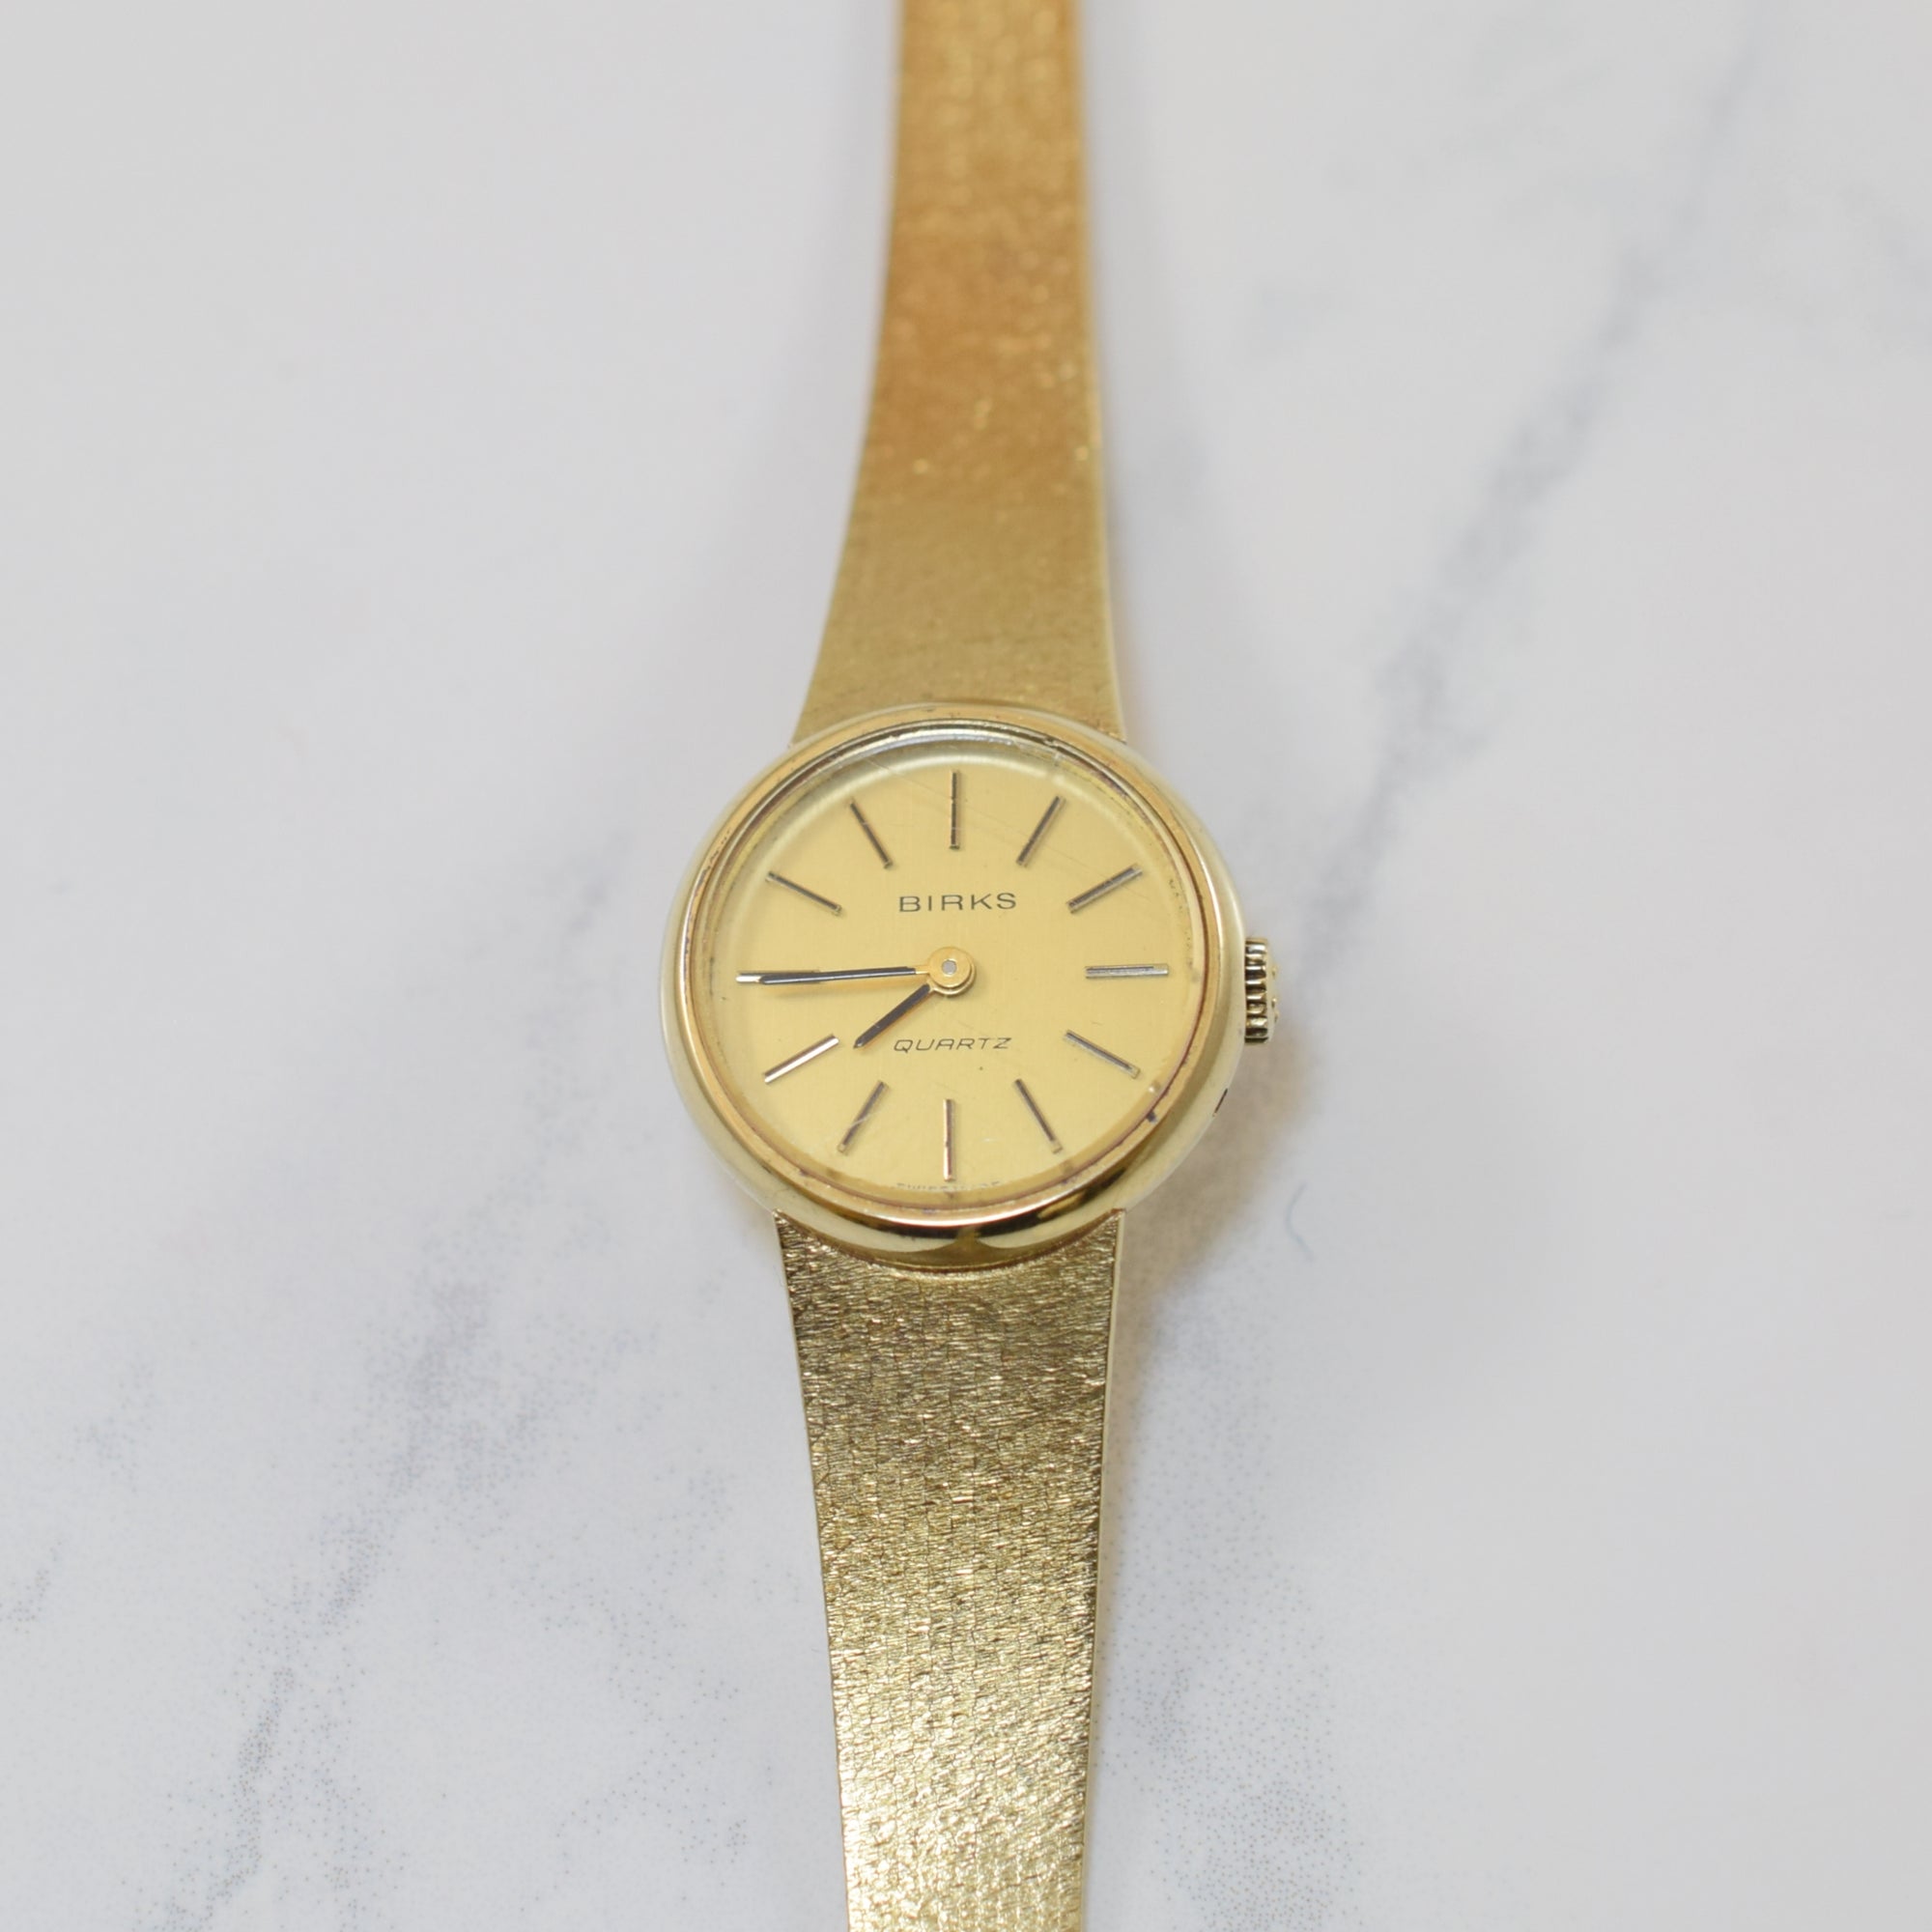 1960s Birks Eterna-Matic - Watches To Buy - London, ON